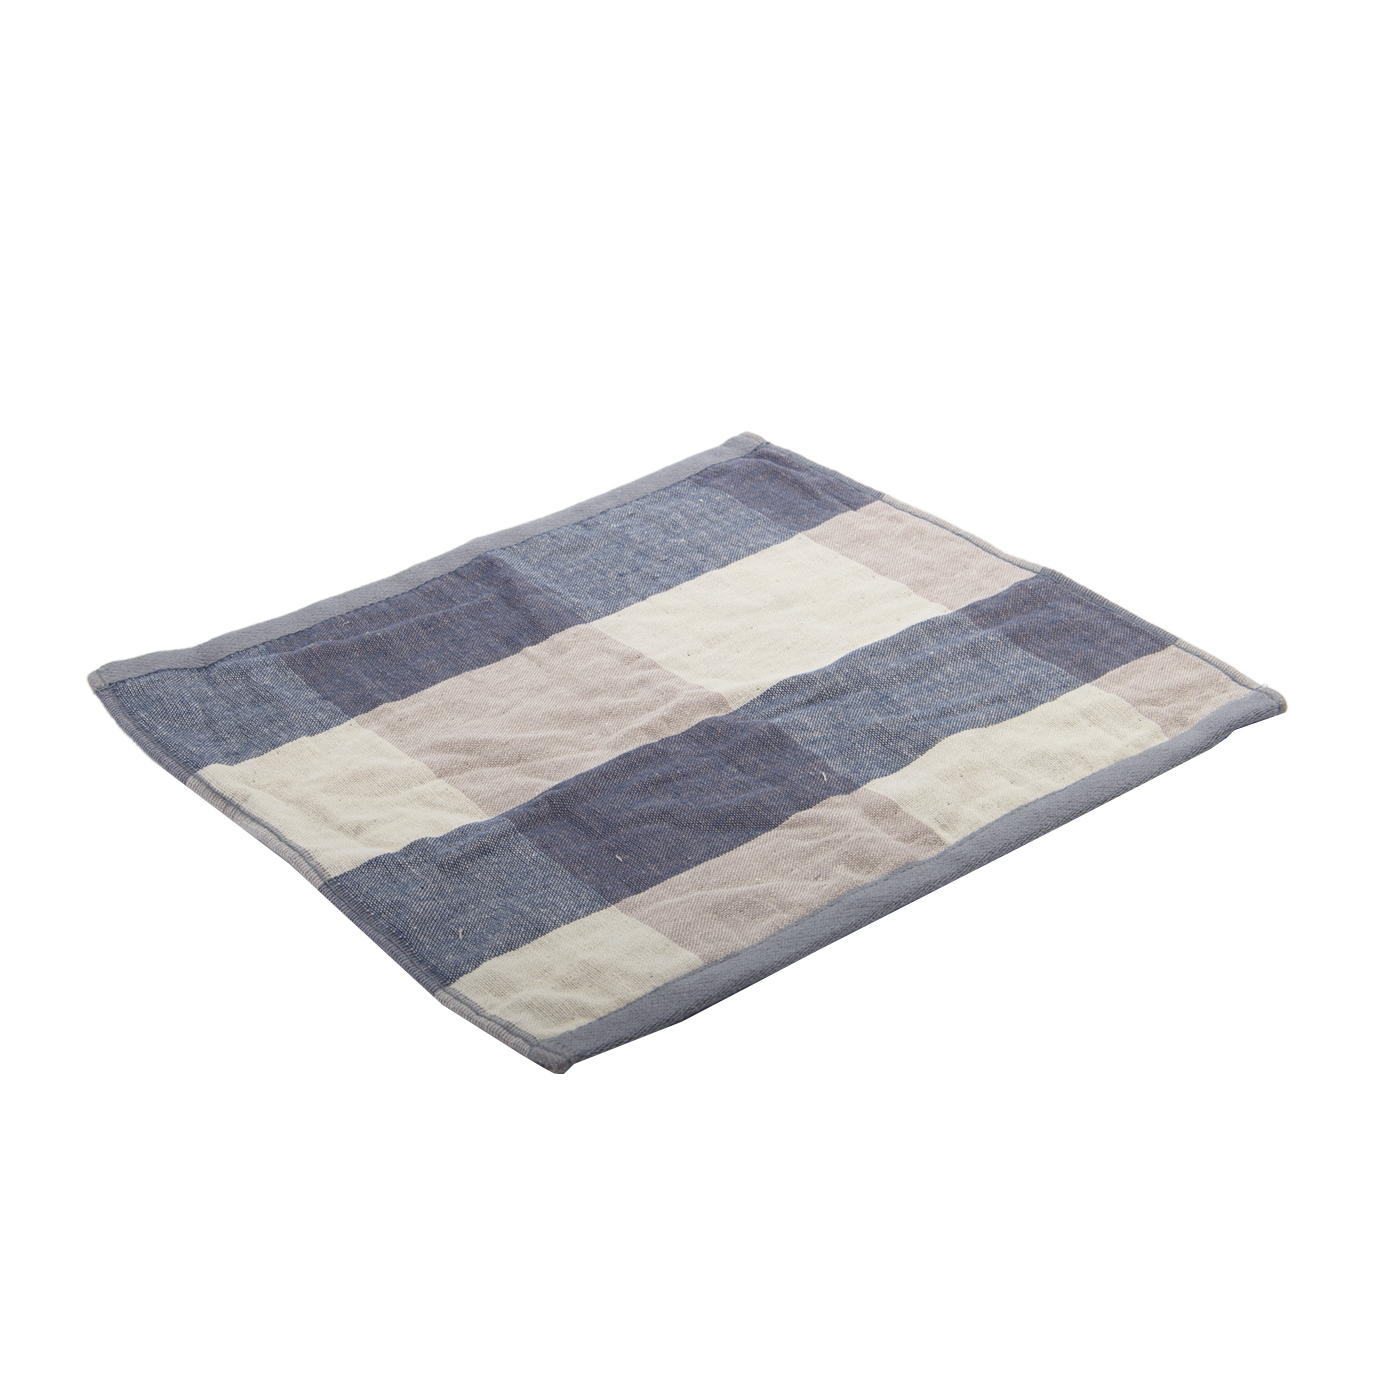 Checked Cotton Hand Towel